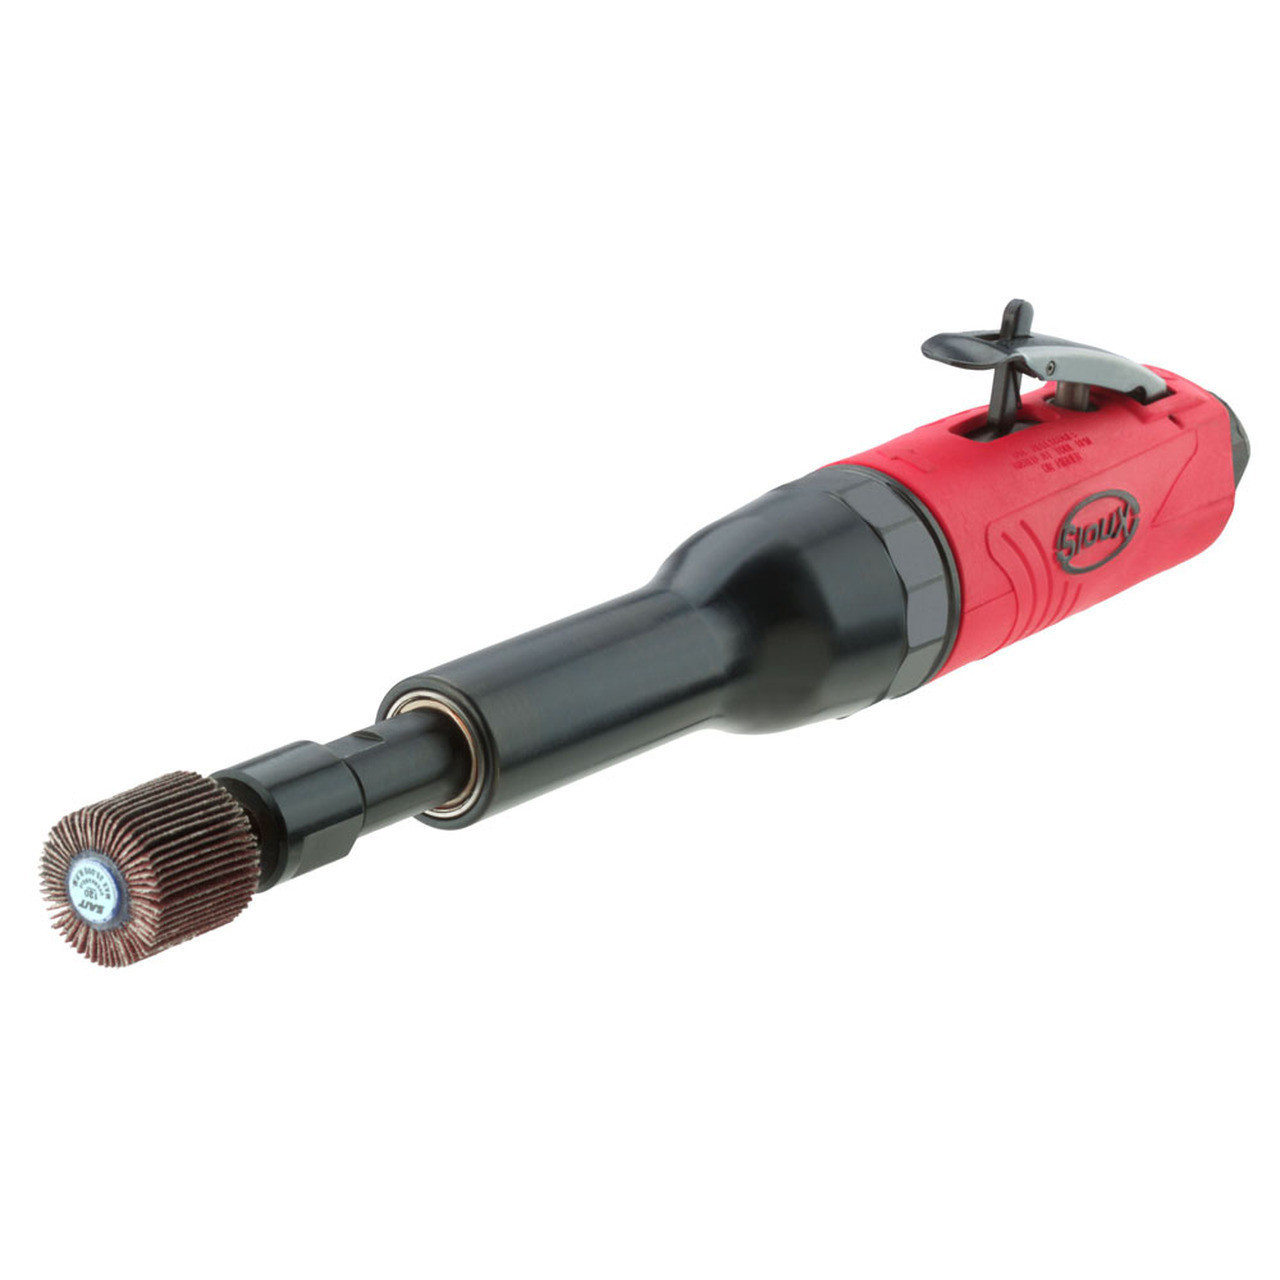 Sioux Tools SXG05S23 Extended Die Grinder or 0.5 HP or 23000 RPM or Rear Exhaust or 1/4 Collet